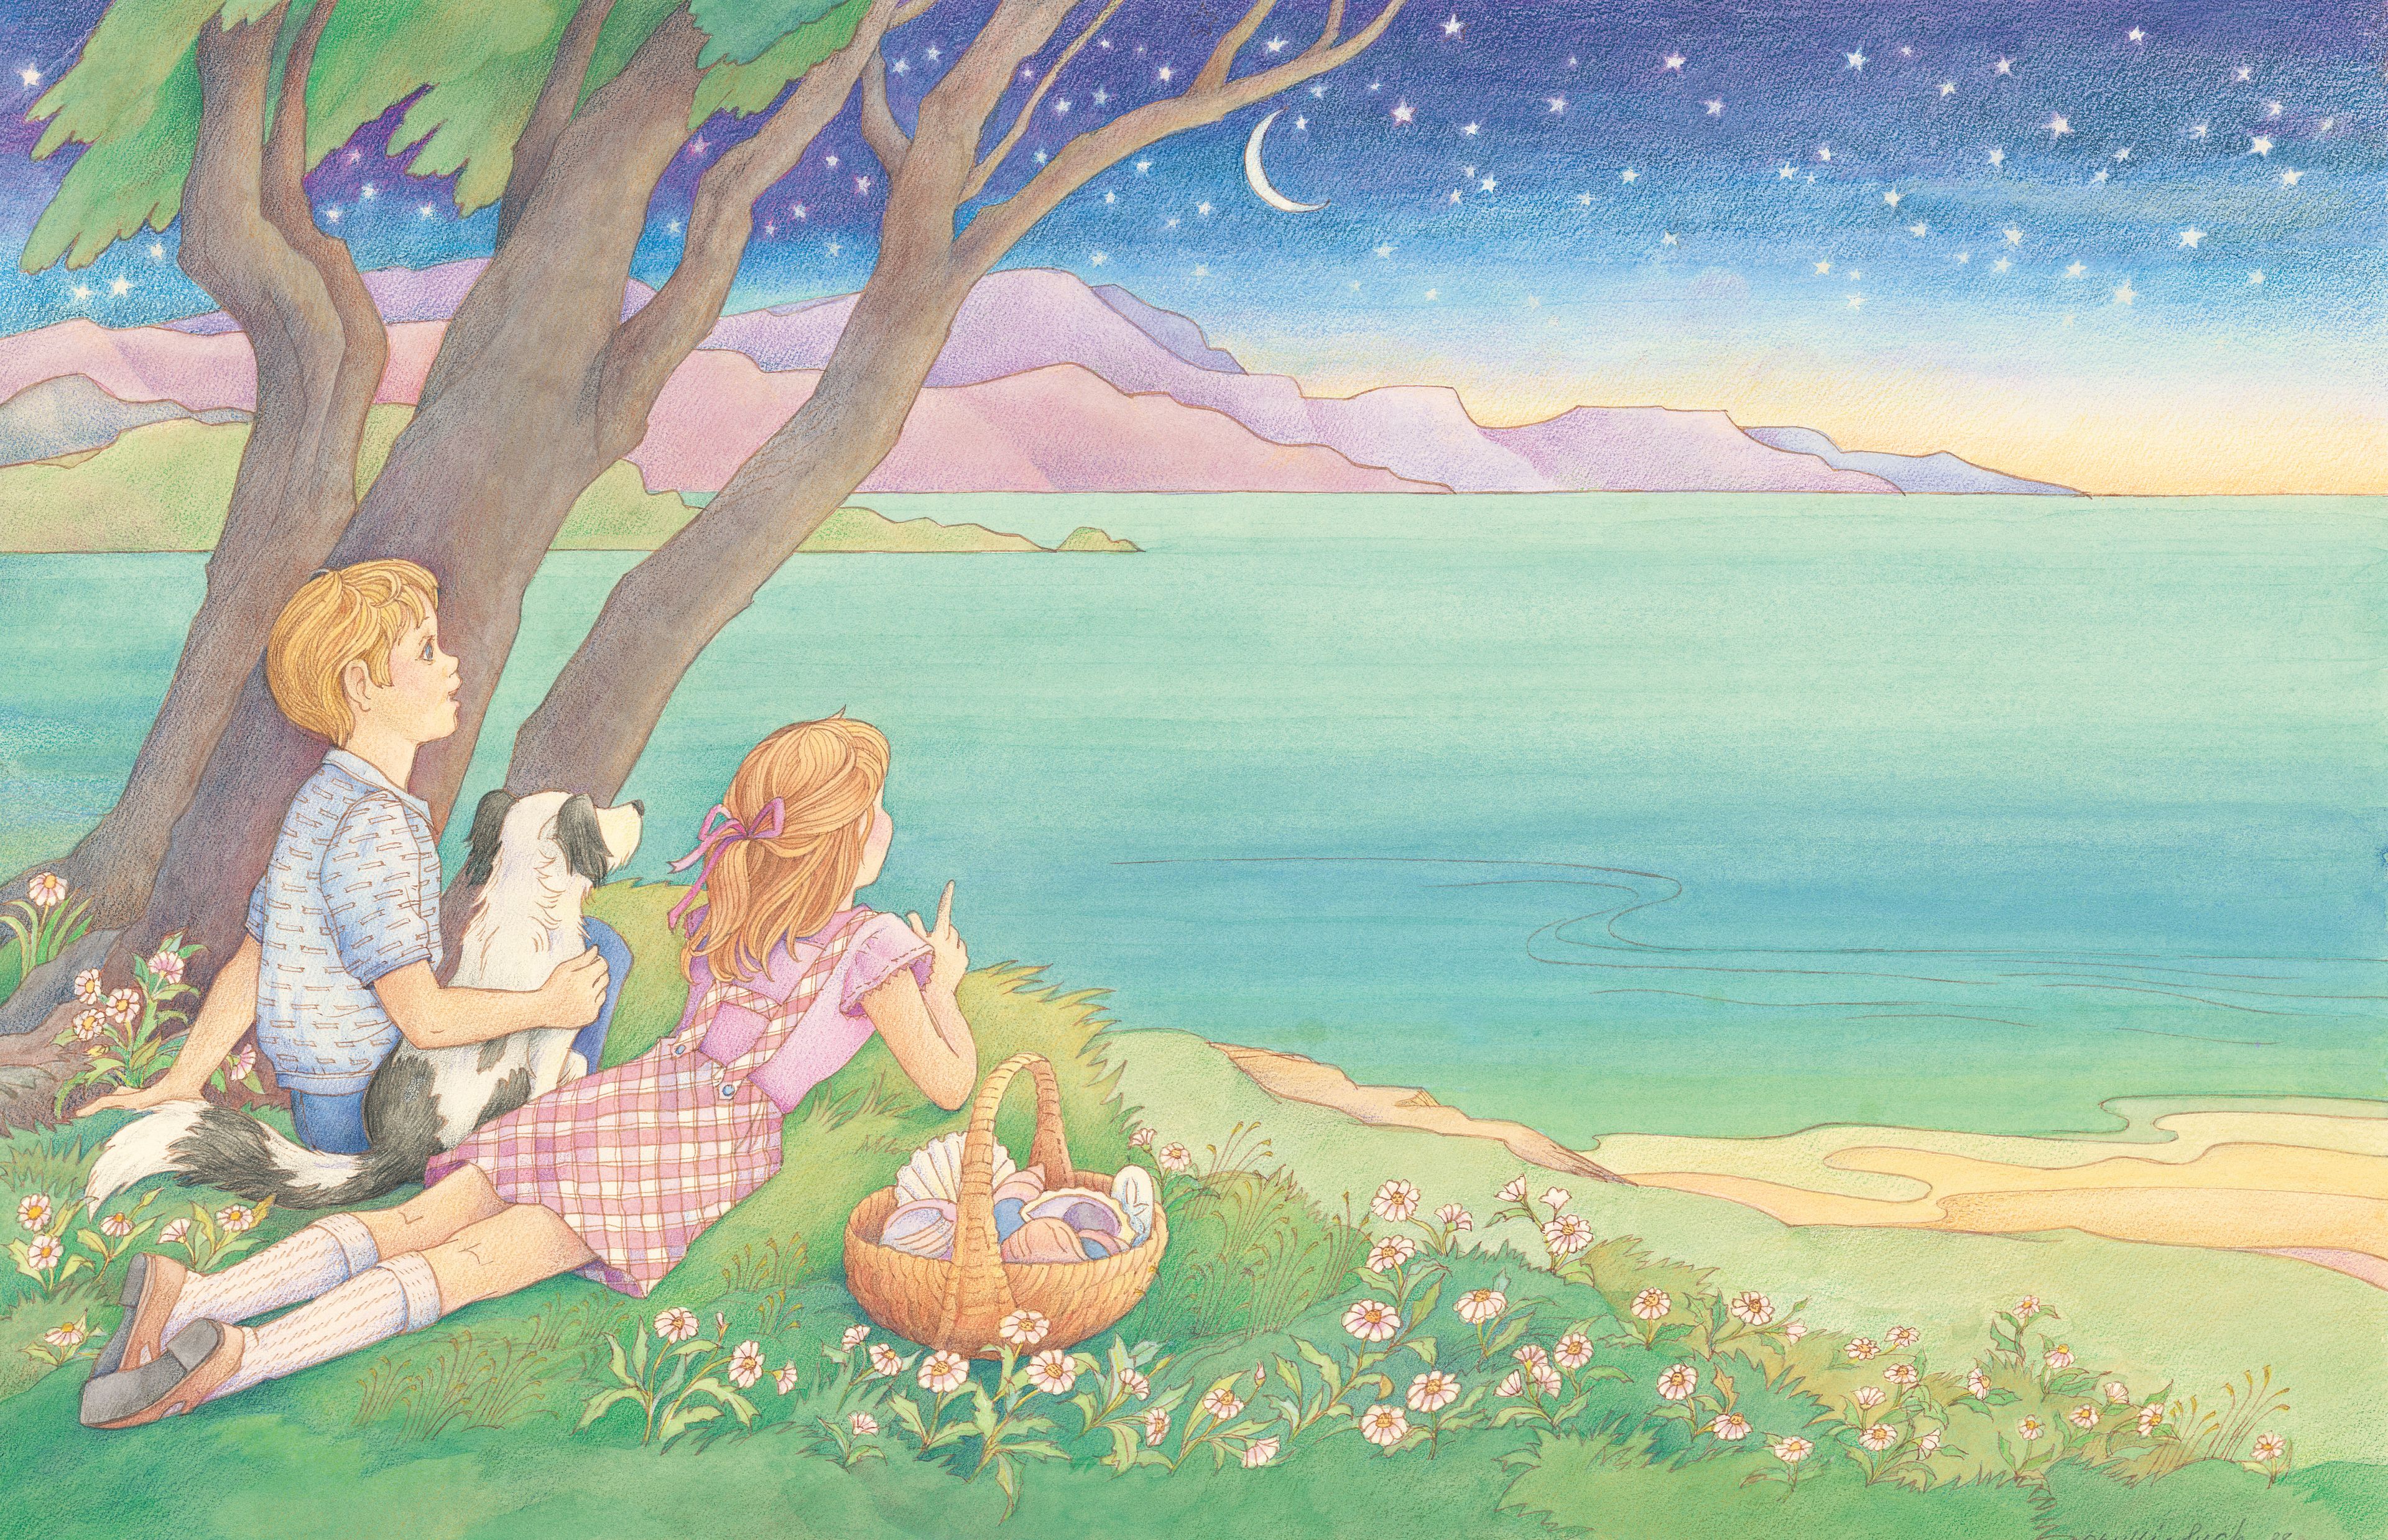 Two children and a dog sit near the sea and gaze up at the night sky. From the section “Nature and Seasons” in the Children’s Songbook, pages 226–227; watercolor illustration by Phyllis Luch.